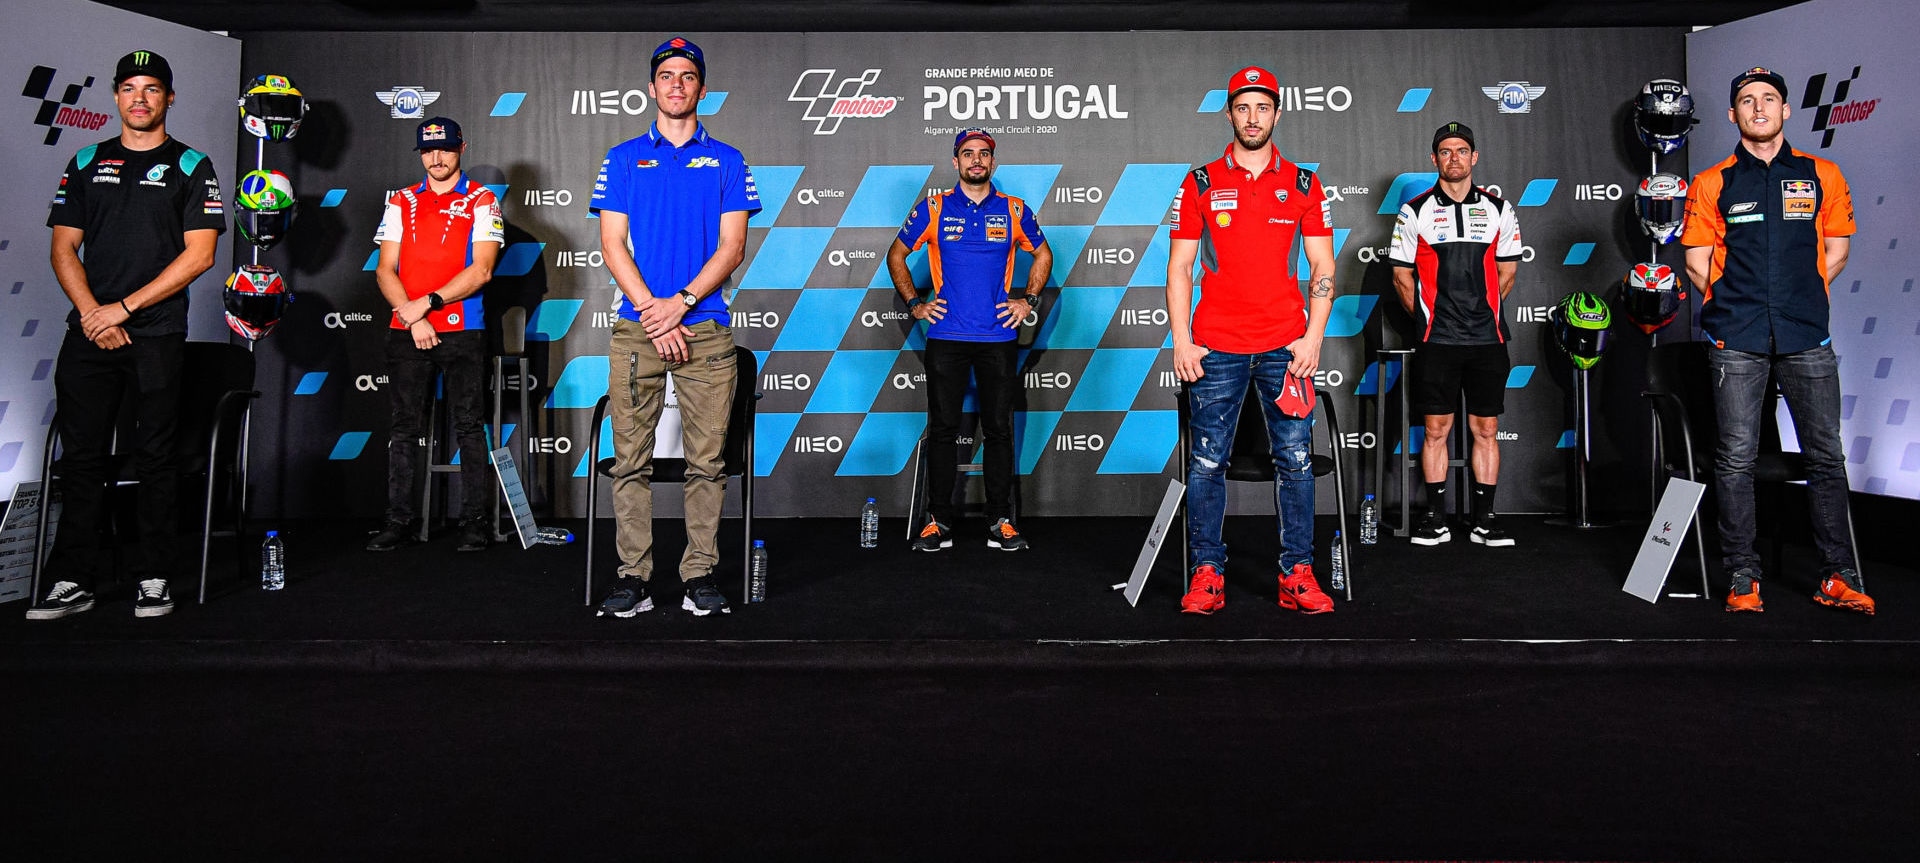 MotoGP riders (from left) Franco Morbidelli, Jack Miller, Joan Mir, Miguel Oliveira, Andrea Dovizioso, Cal Crutchlow, and Pol Espargaro at the pre-event press conference in Portugal. Photo courtesy Dorna.